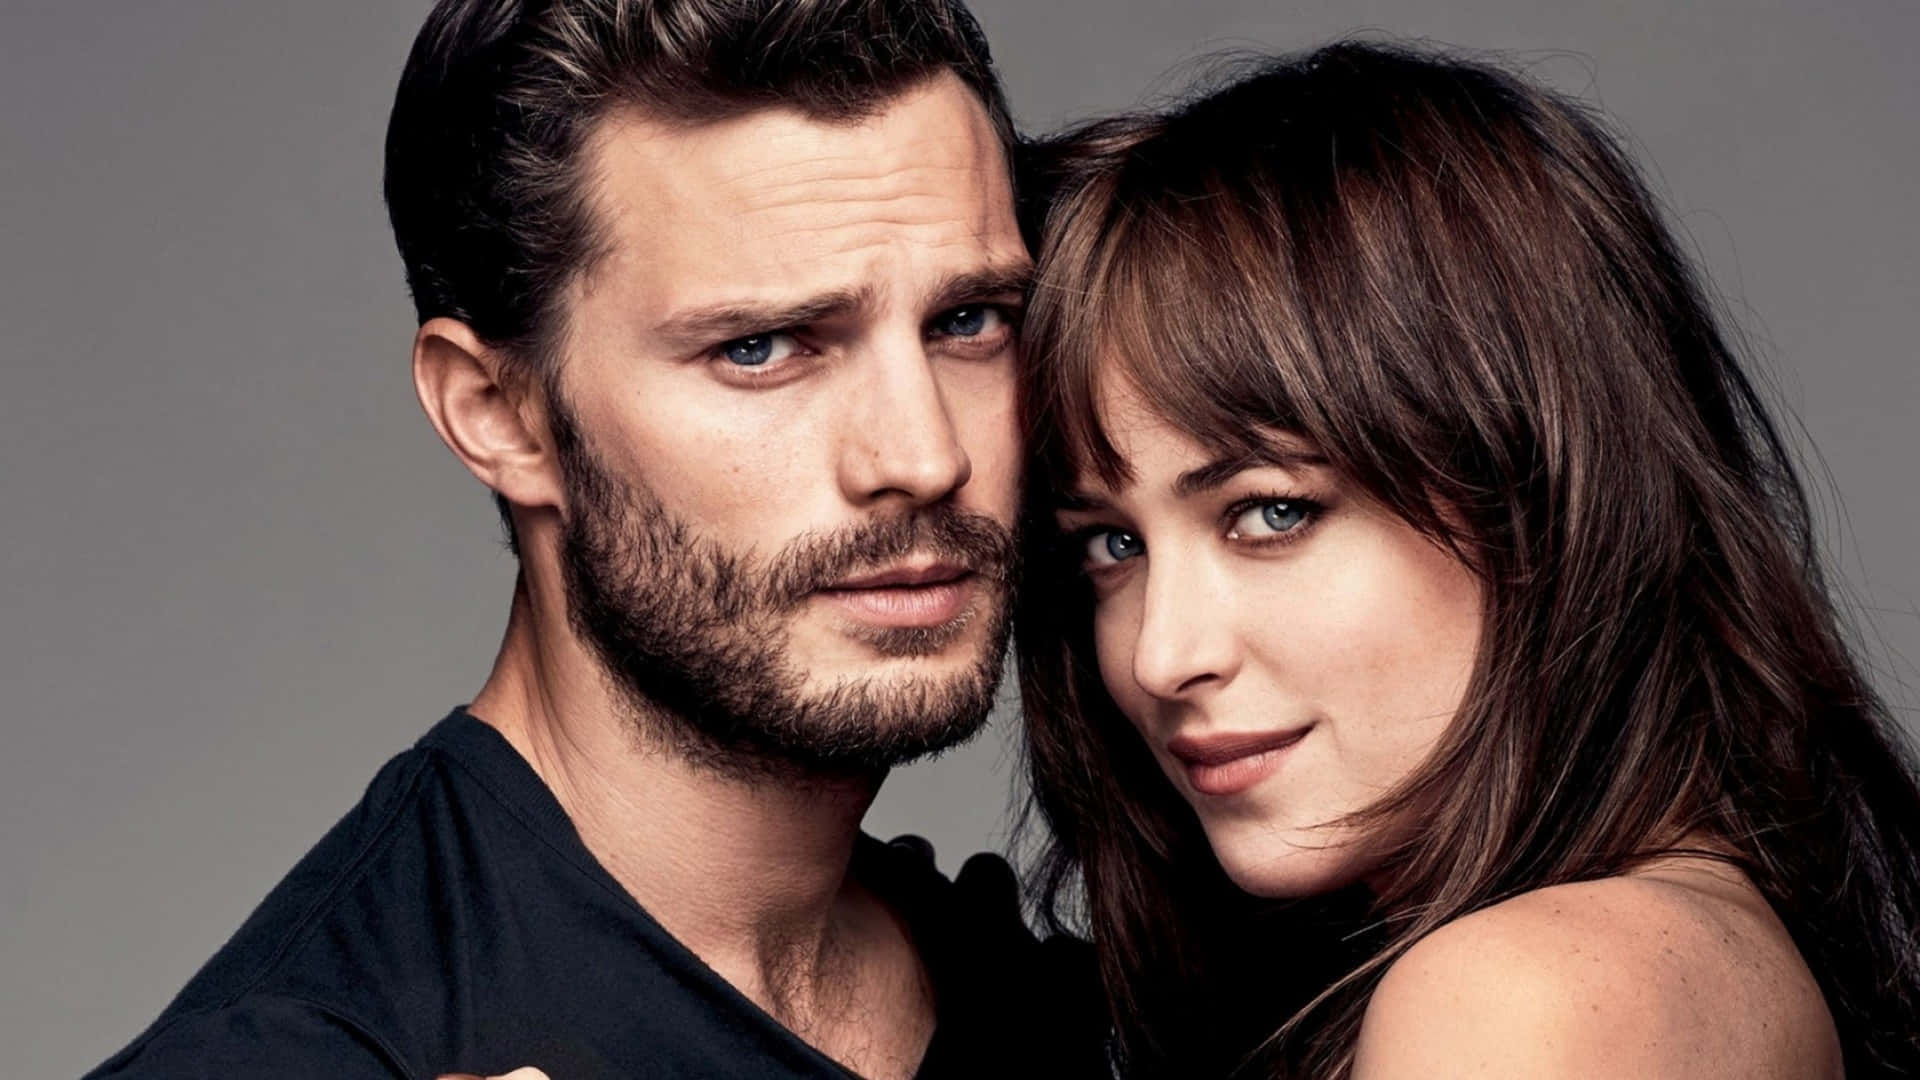 Couple From Fifty Shades Of Grey Background